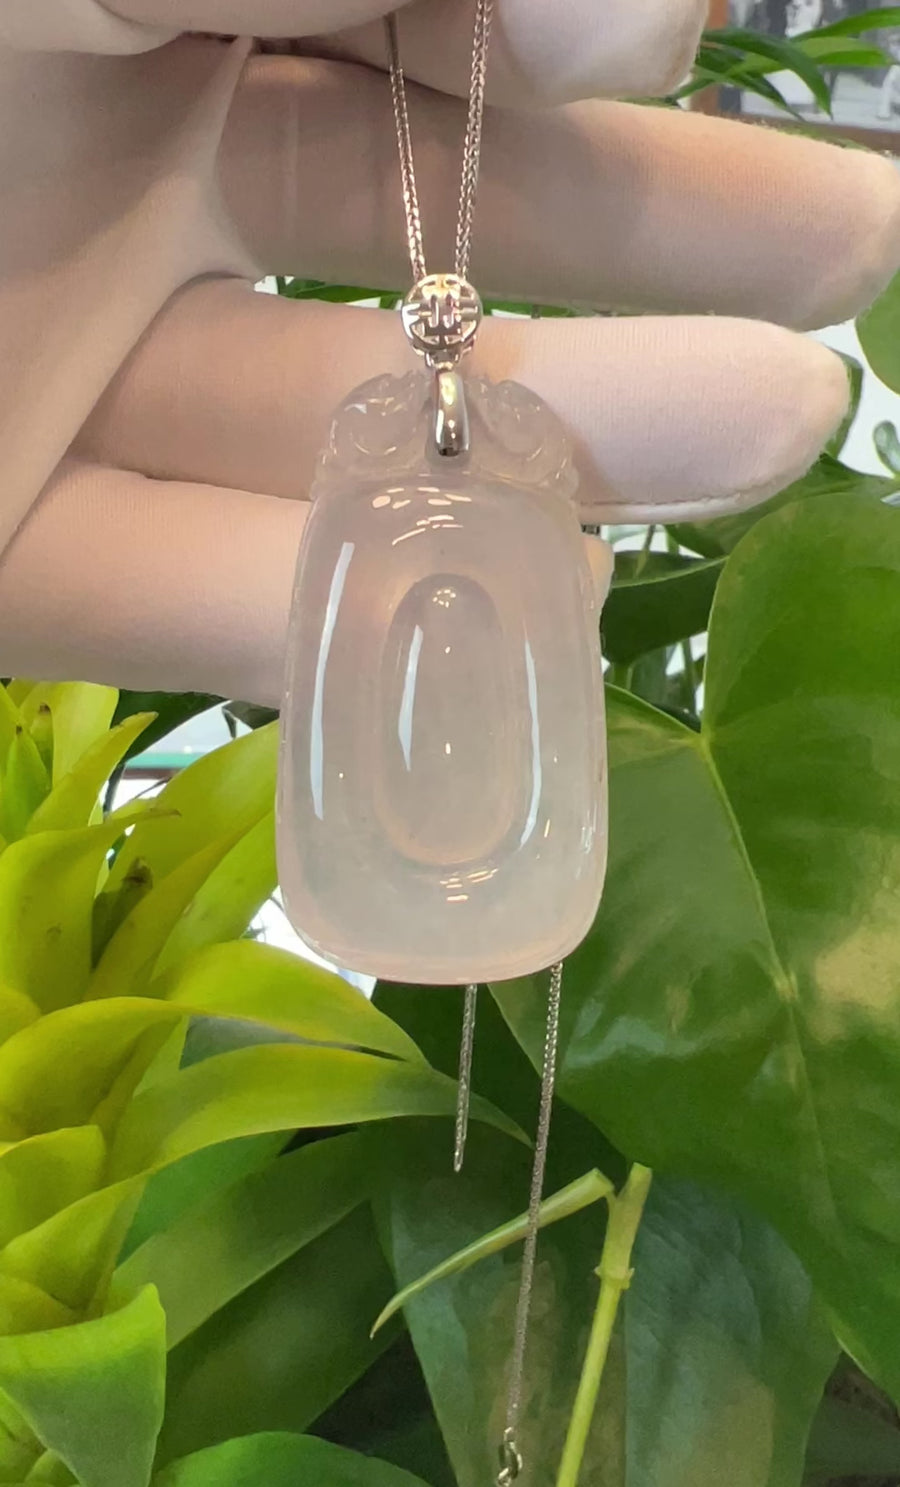 Genuine Ice White Jadeite Jade "Happiness in front of your eyes" Fu Zai Yan Qian Pendant Necklace With 14K White Gold Bail